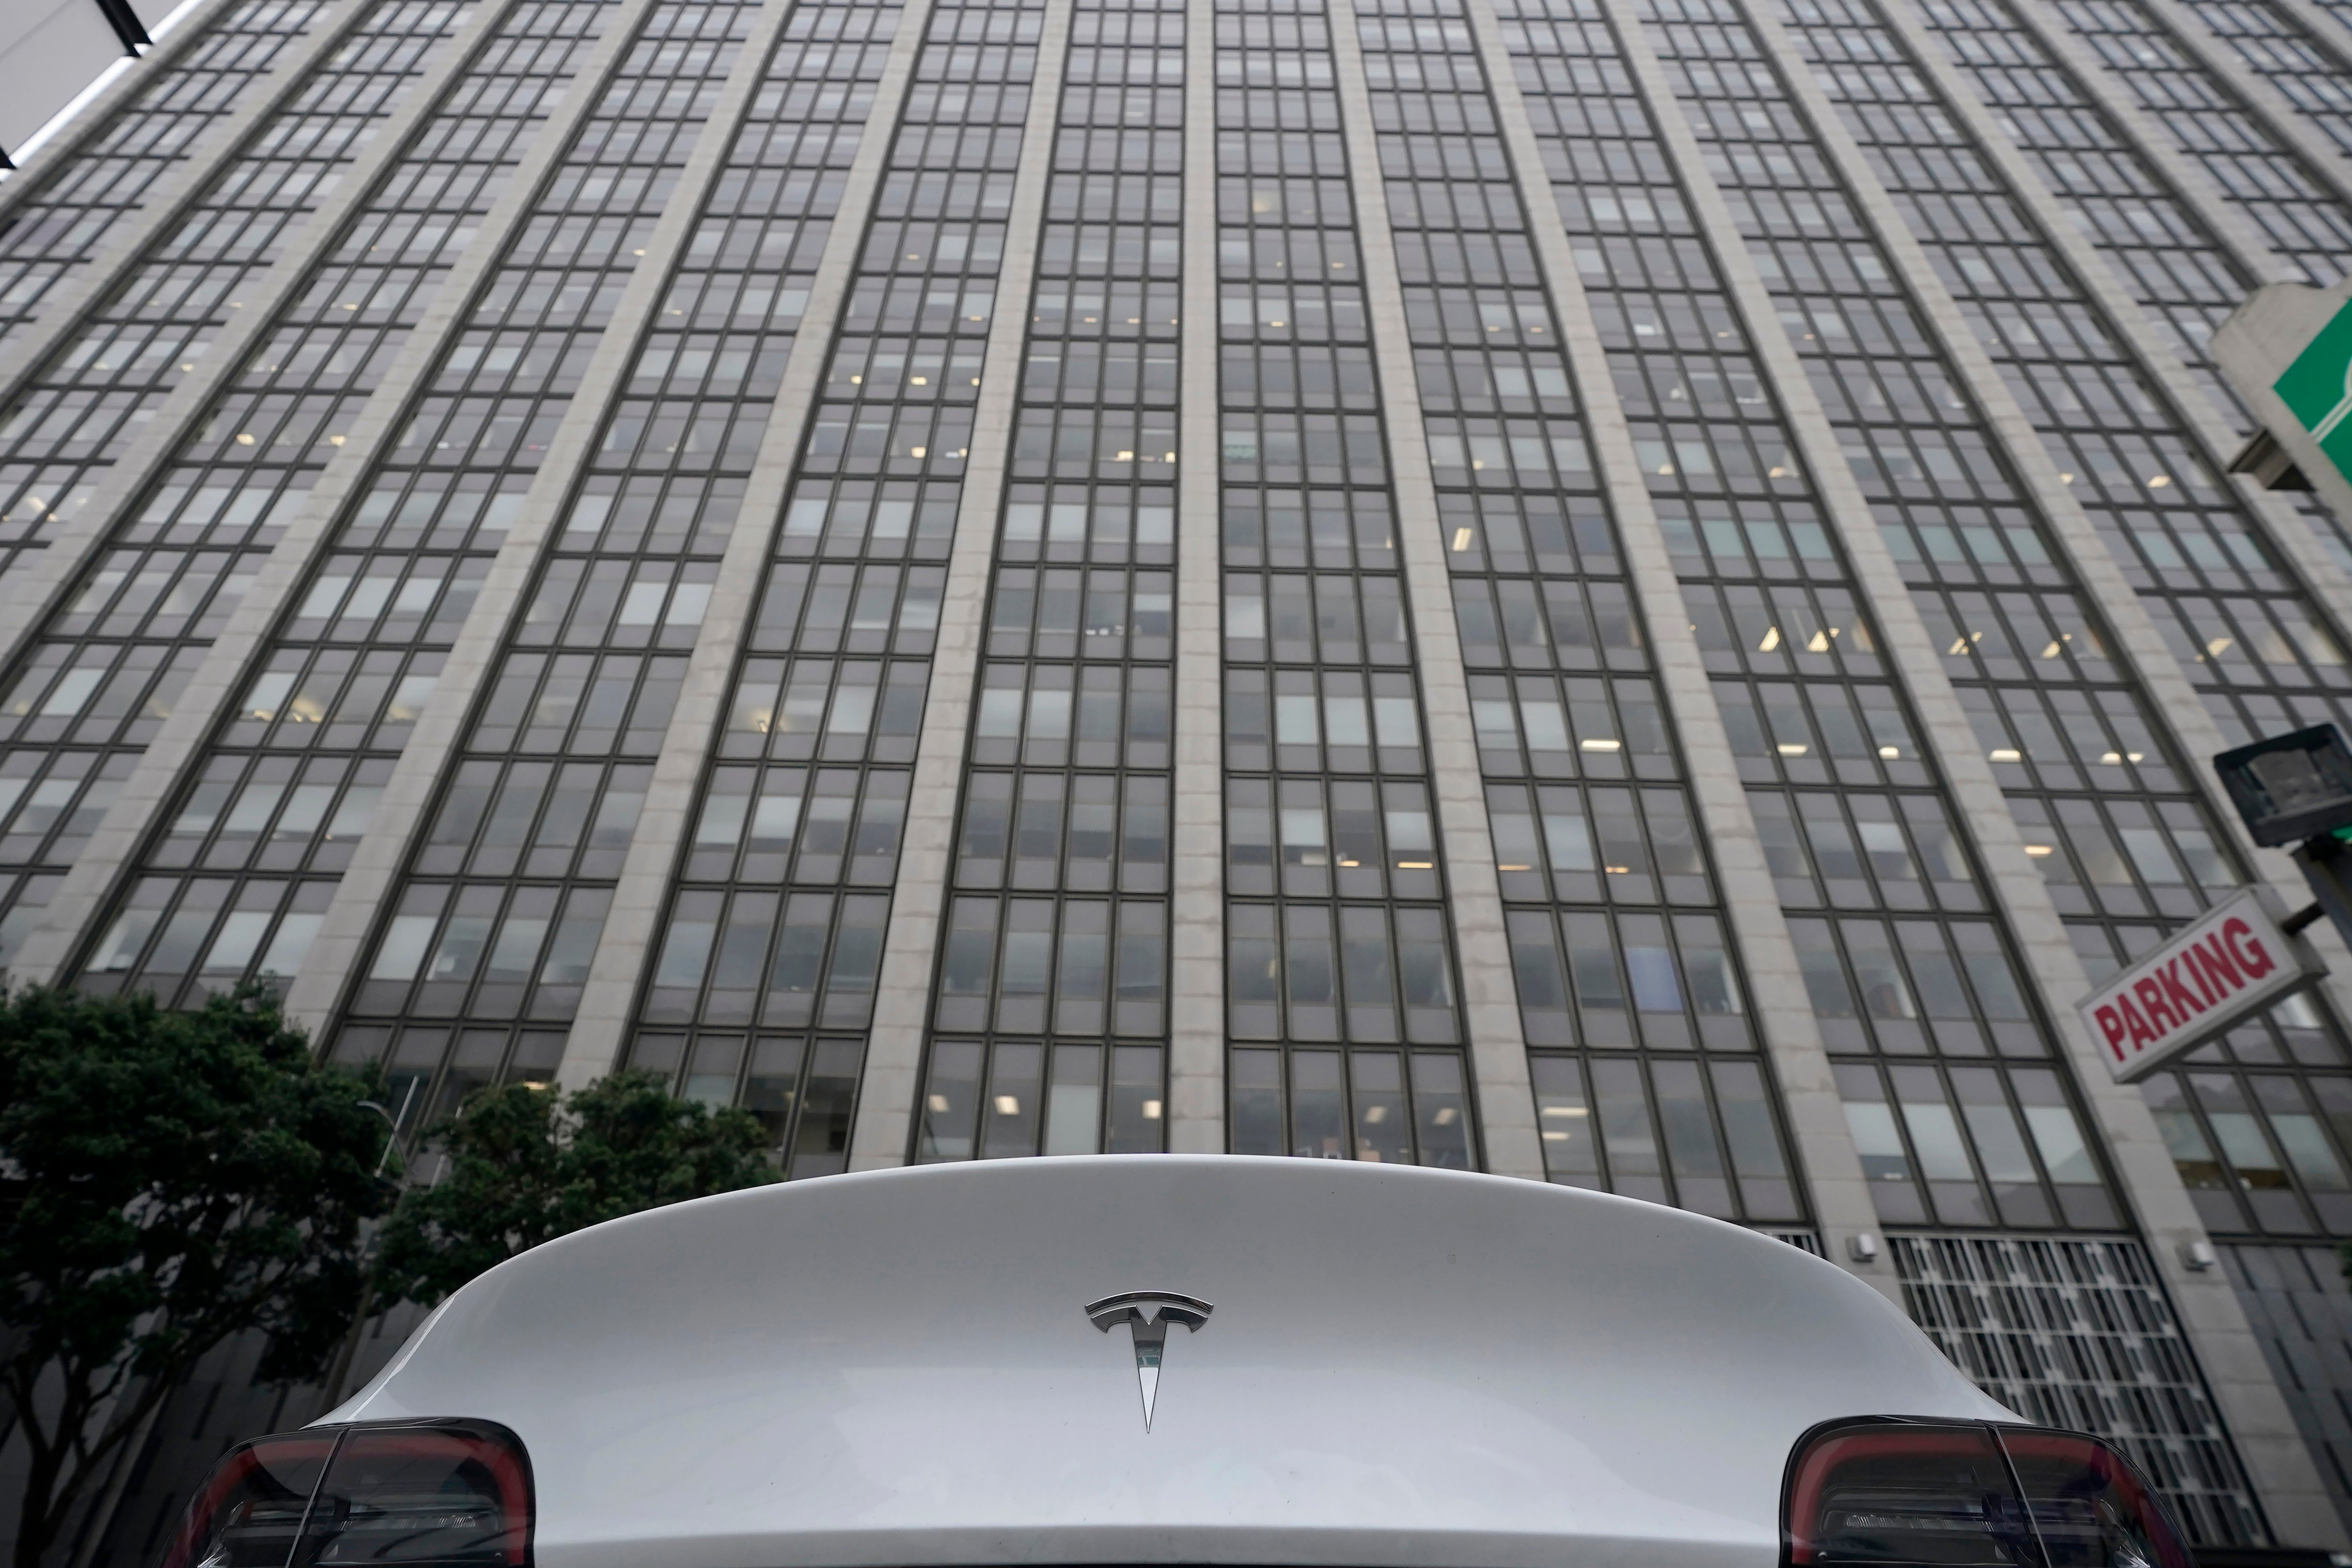 A Tesla car is parked in a lot across the street from a federal courthouse in San Francisco, Wednesday, Jan. 18, 2023. Elon Musk was depicted Wednesday as either a liar who callously jeopardized the savings of "regular people" or a well-intentioned visionary as attorneys delivered opening statements at a trial focused on a Tesla buyout that never happened. (Jeff Chiu–AP)